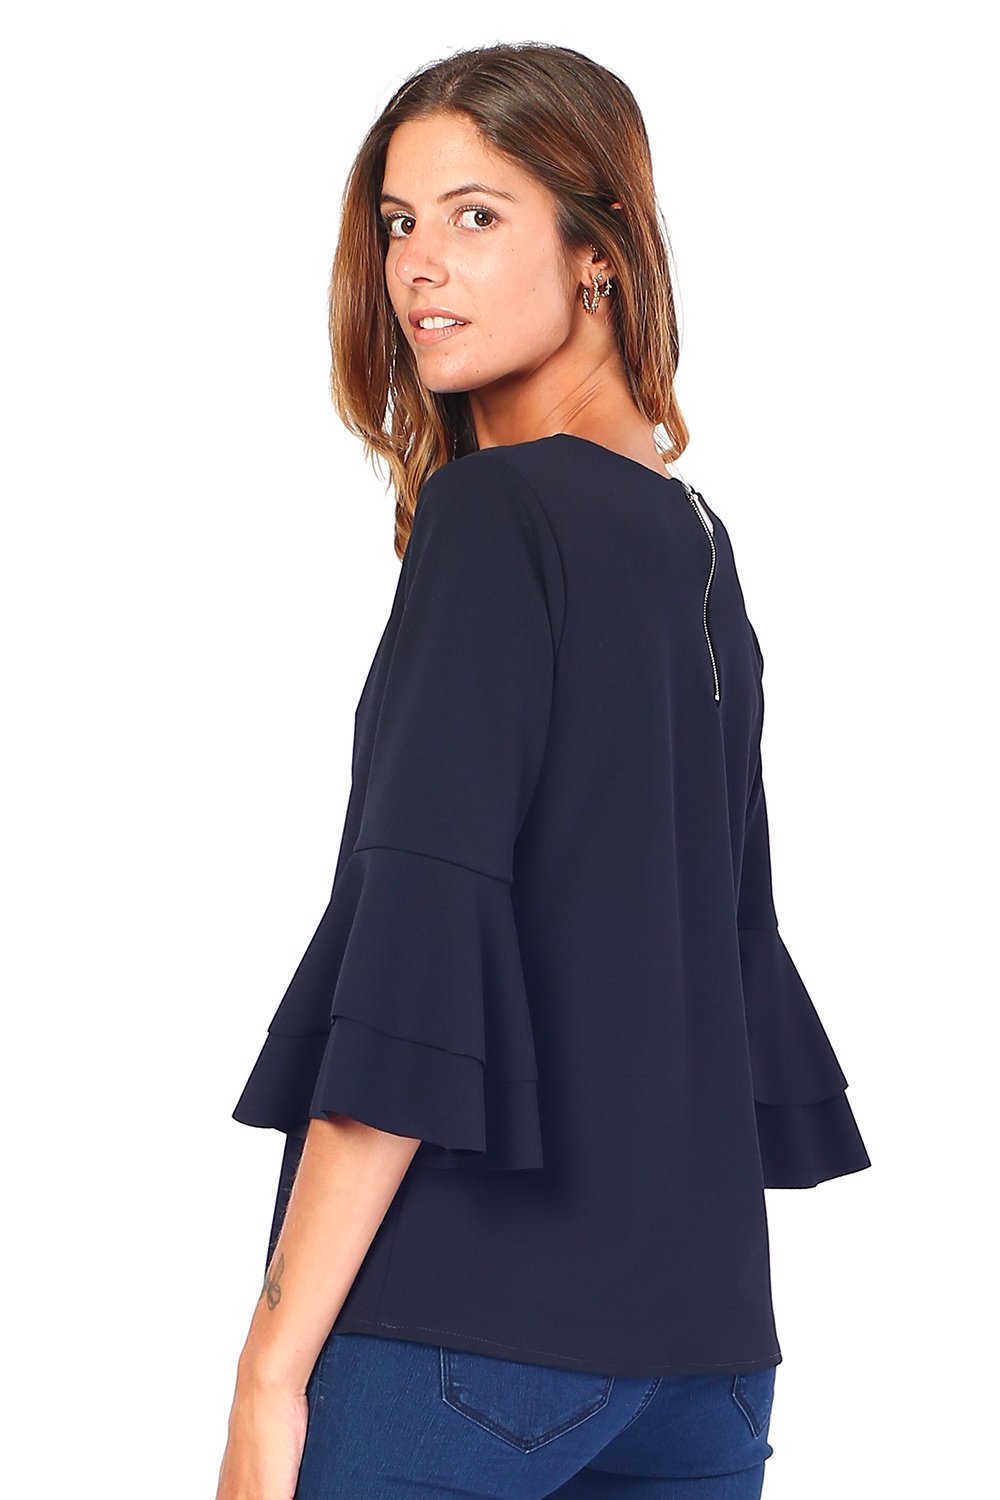 ROUND COLLAR TOP WITH BACK ZIPPING AND RUFFLED HALF-SLEEVES